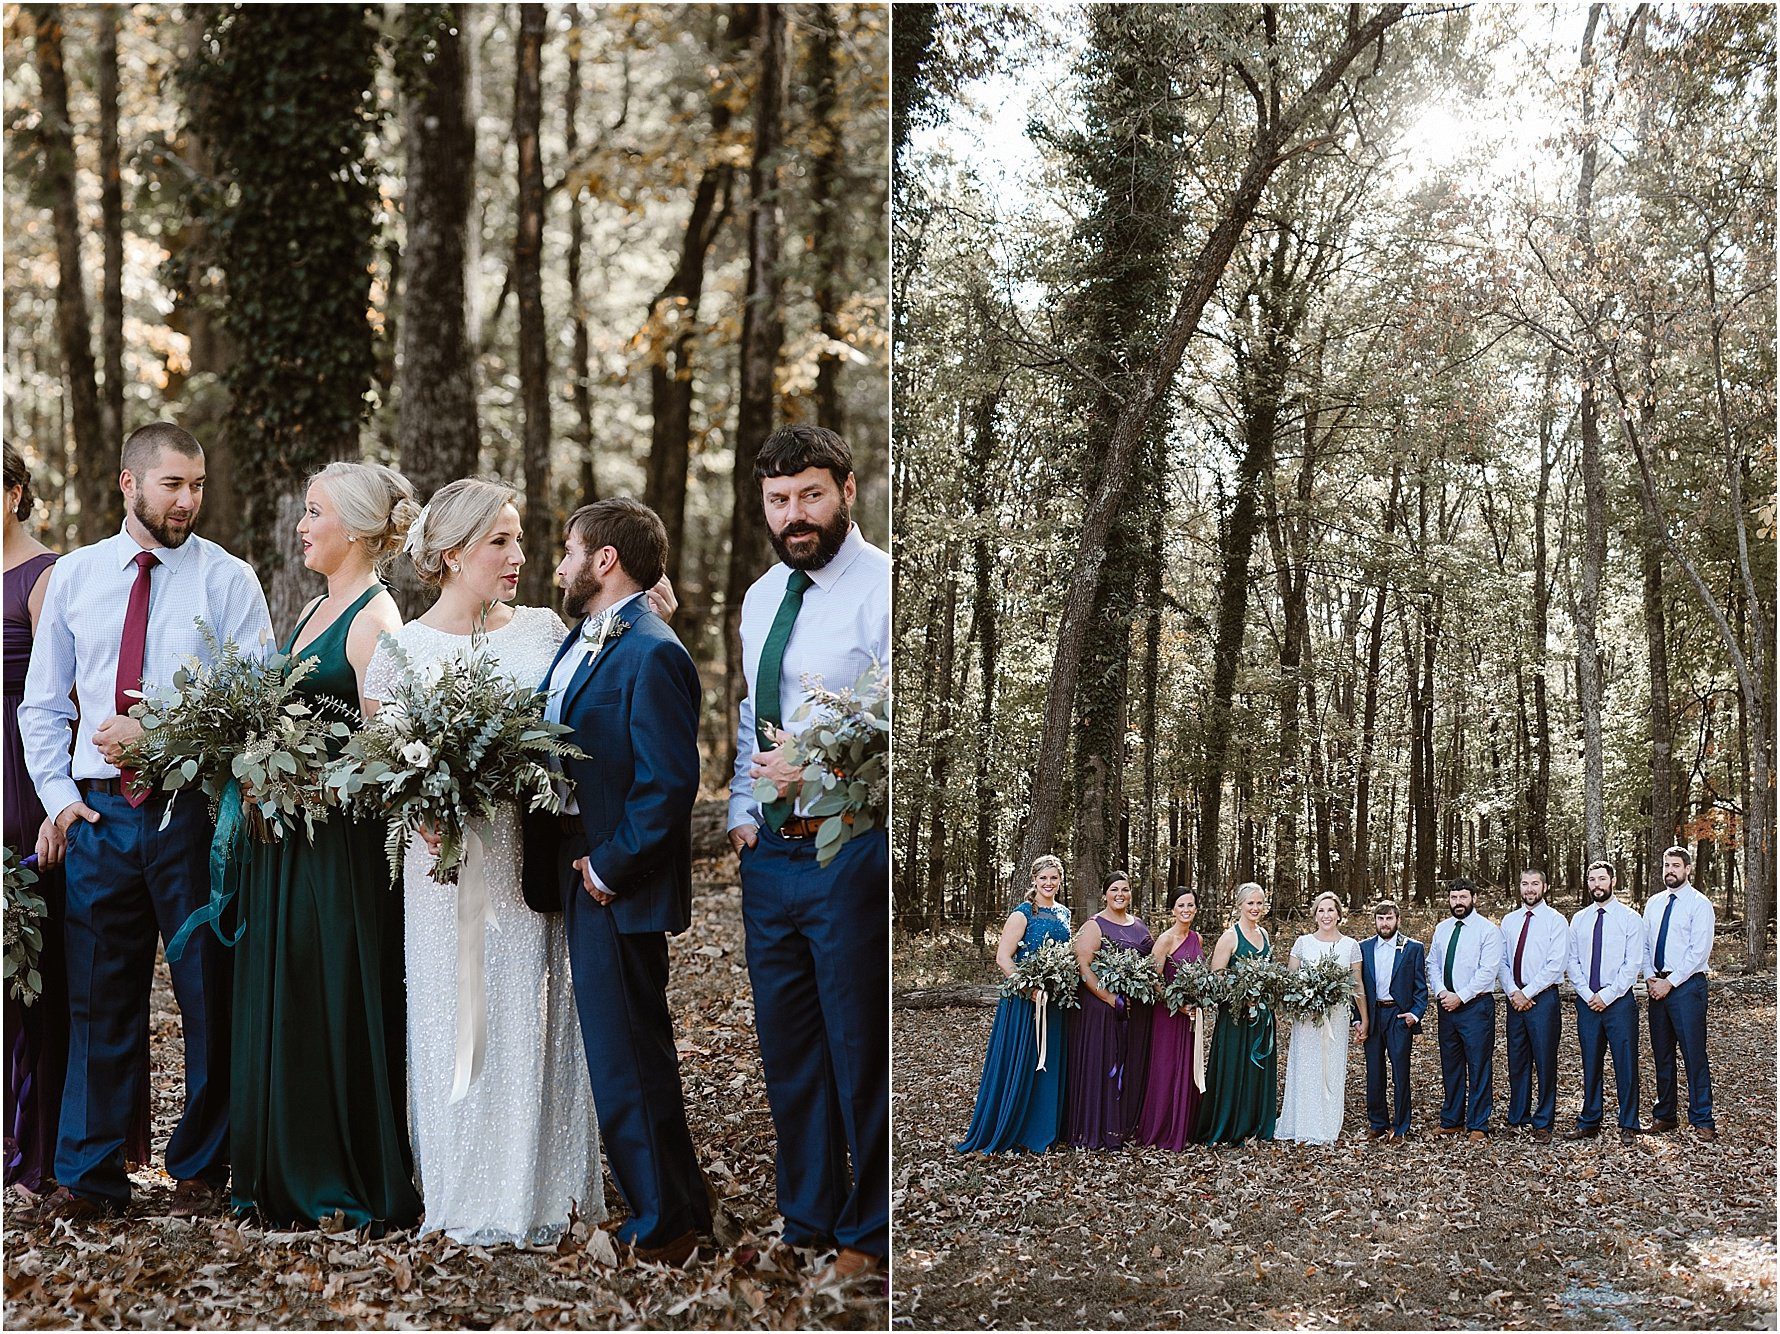 Fall Weddings in Knoxville | Erin Morrison Photography www.erinmorrisonphotography.com